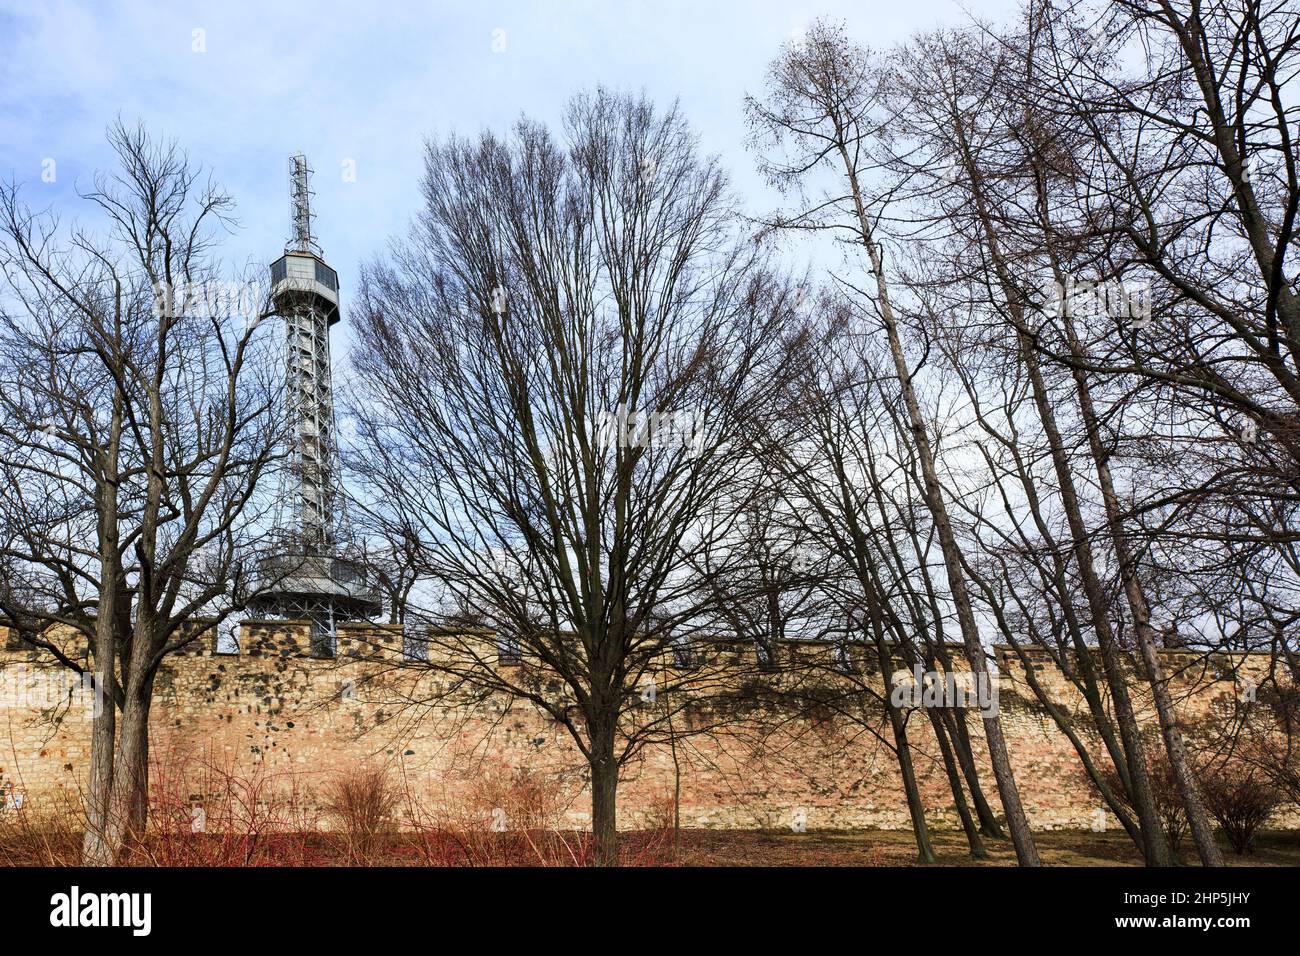 Petrin Lookout Tower from the ground rising above the crenellated walls of Petrin park in winter with bare trees Prague, Czech Republic Stock Photo